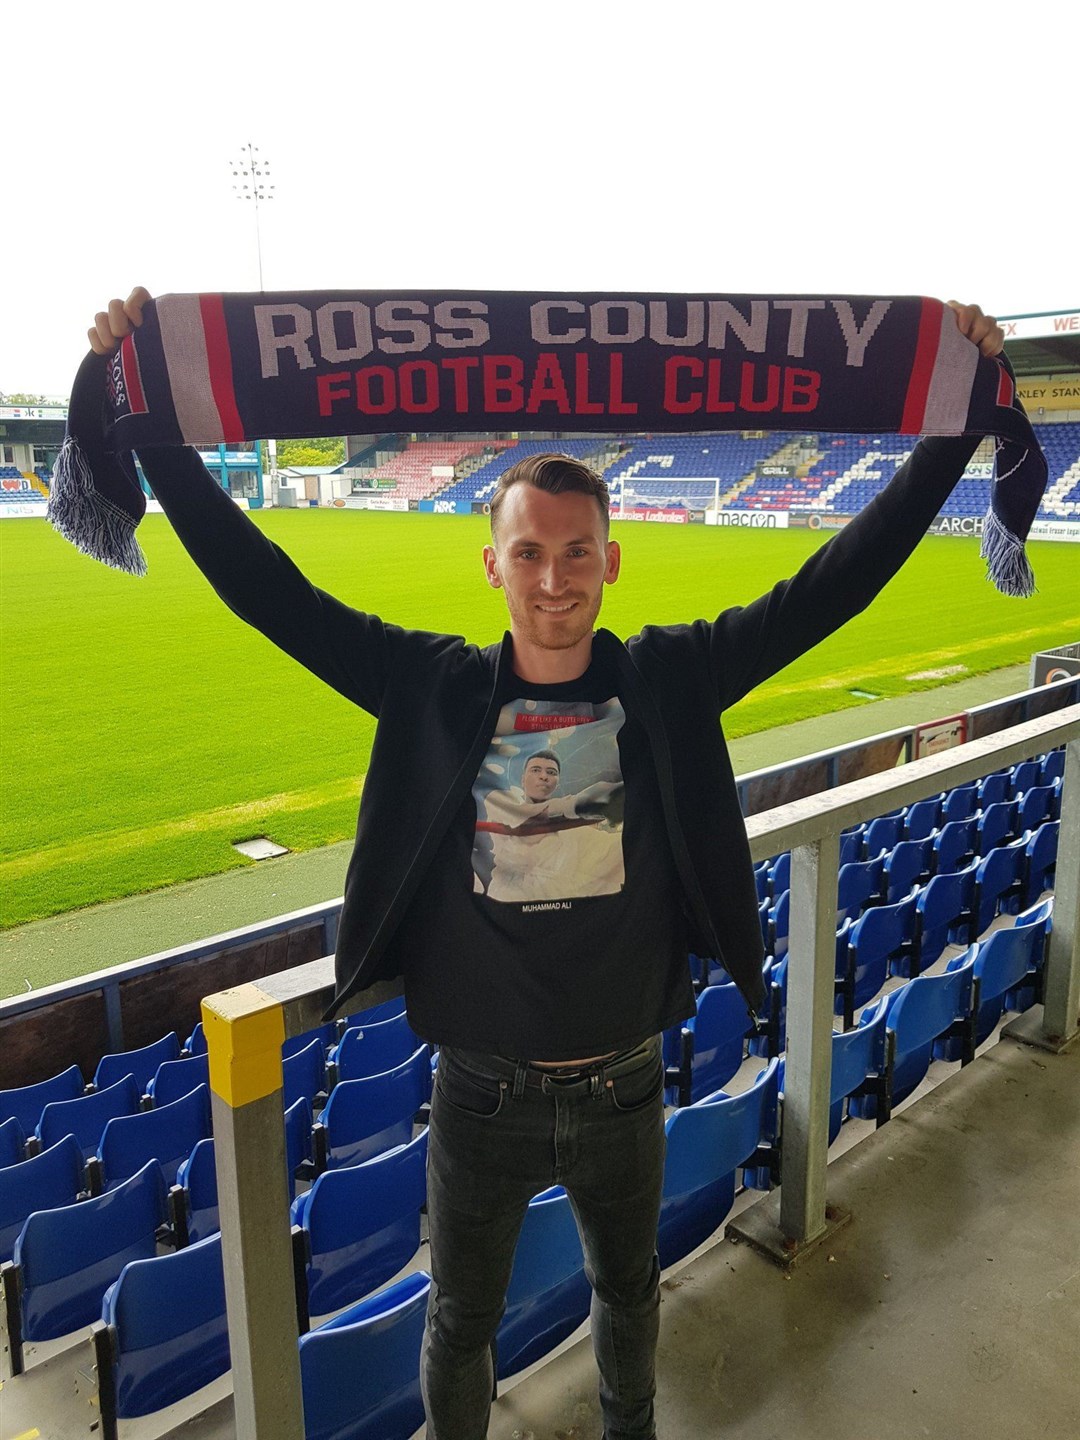 Joe Chalmers signed a two-year deal with Ross County earlier this summer, ending his spell at Caley Thistle.